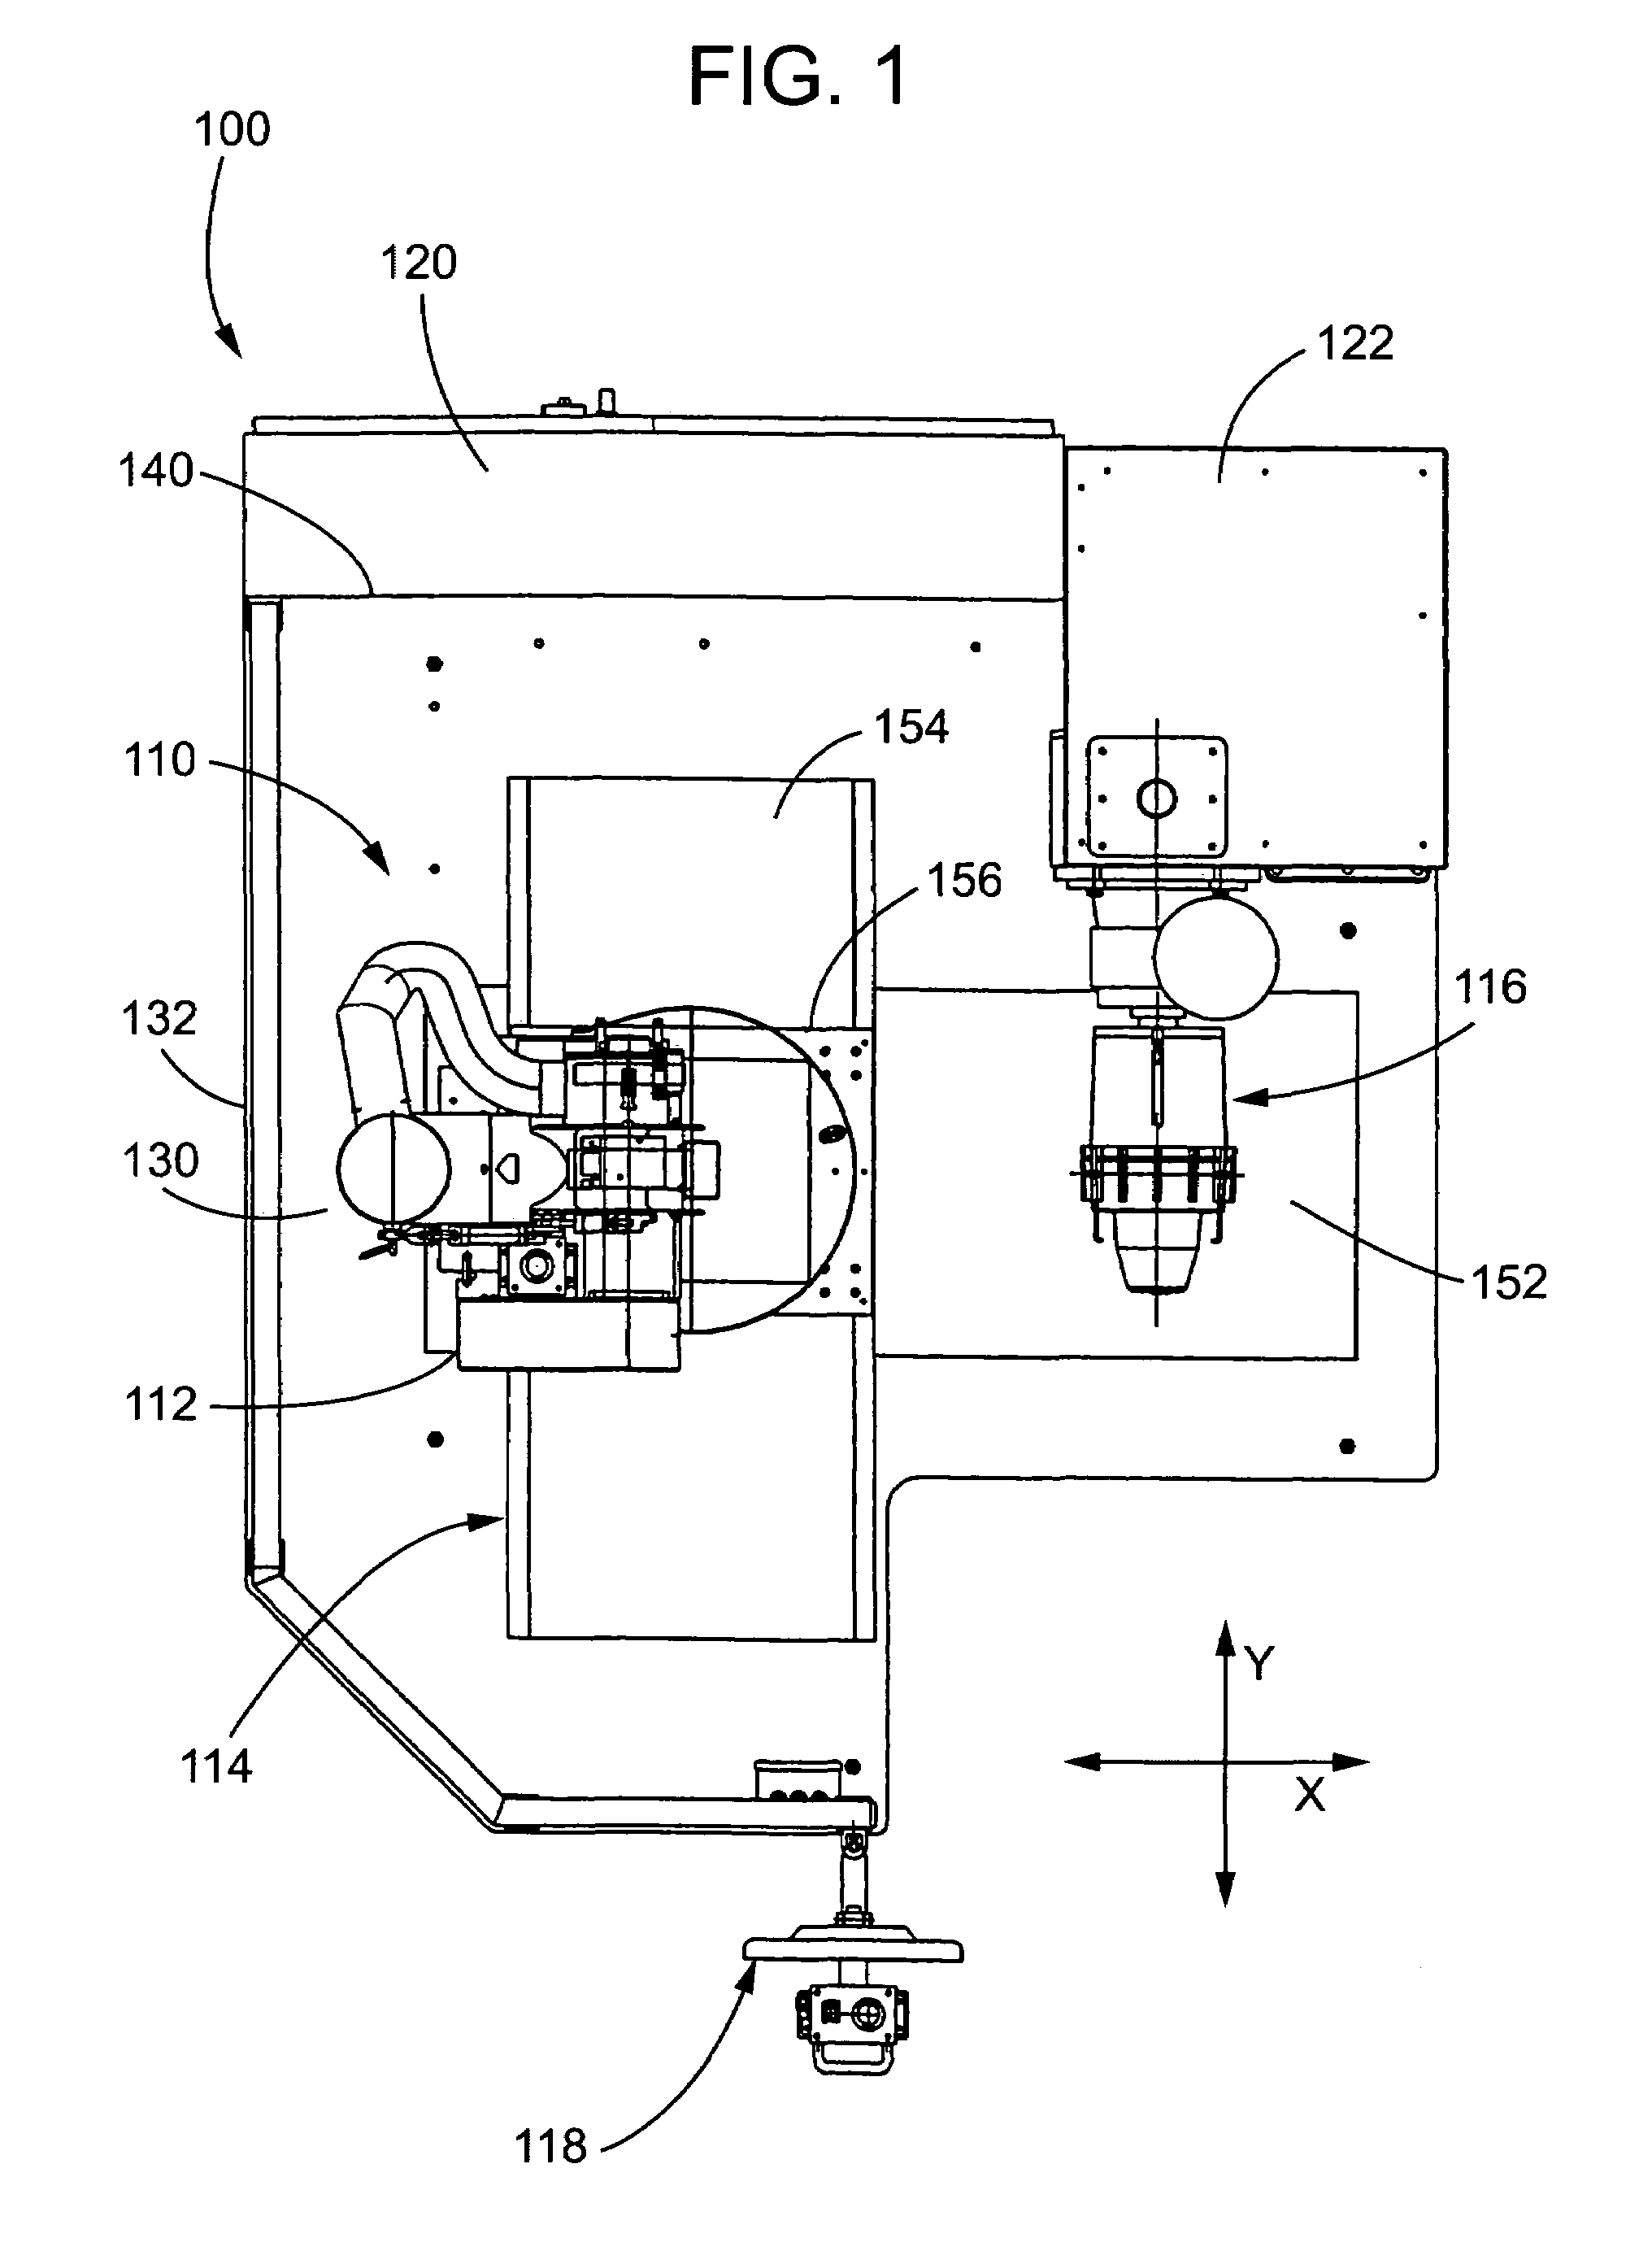 Tire buffing apparatus